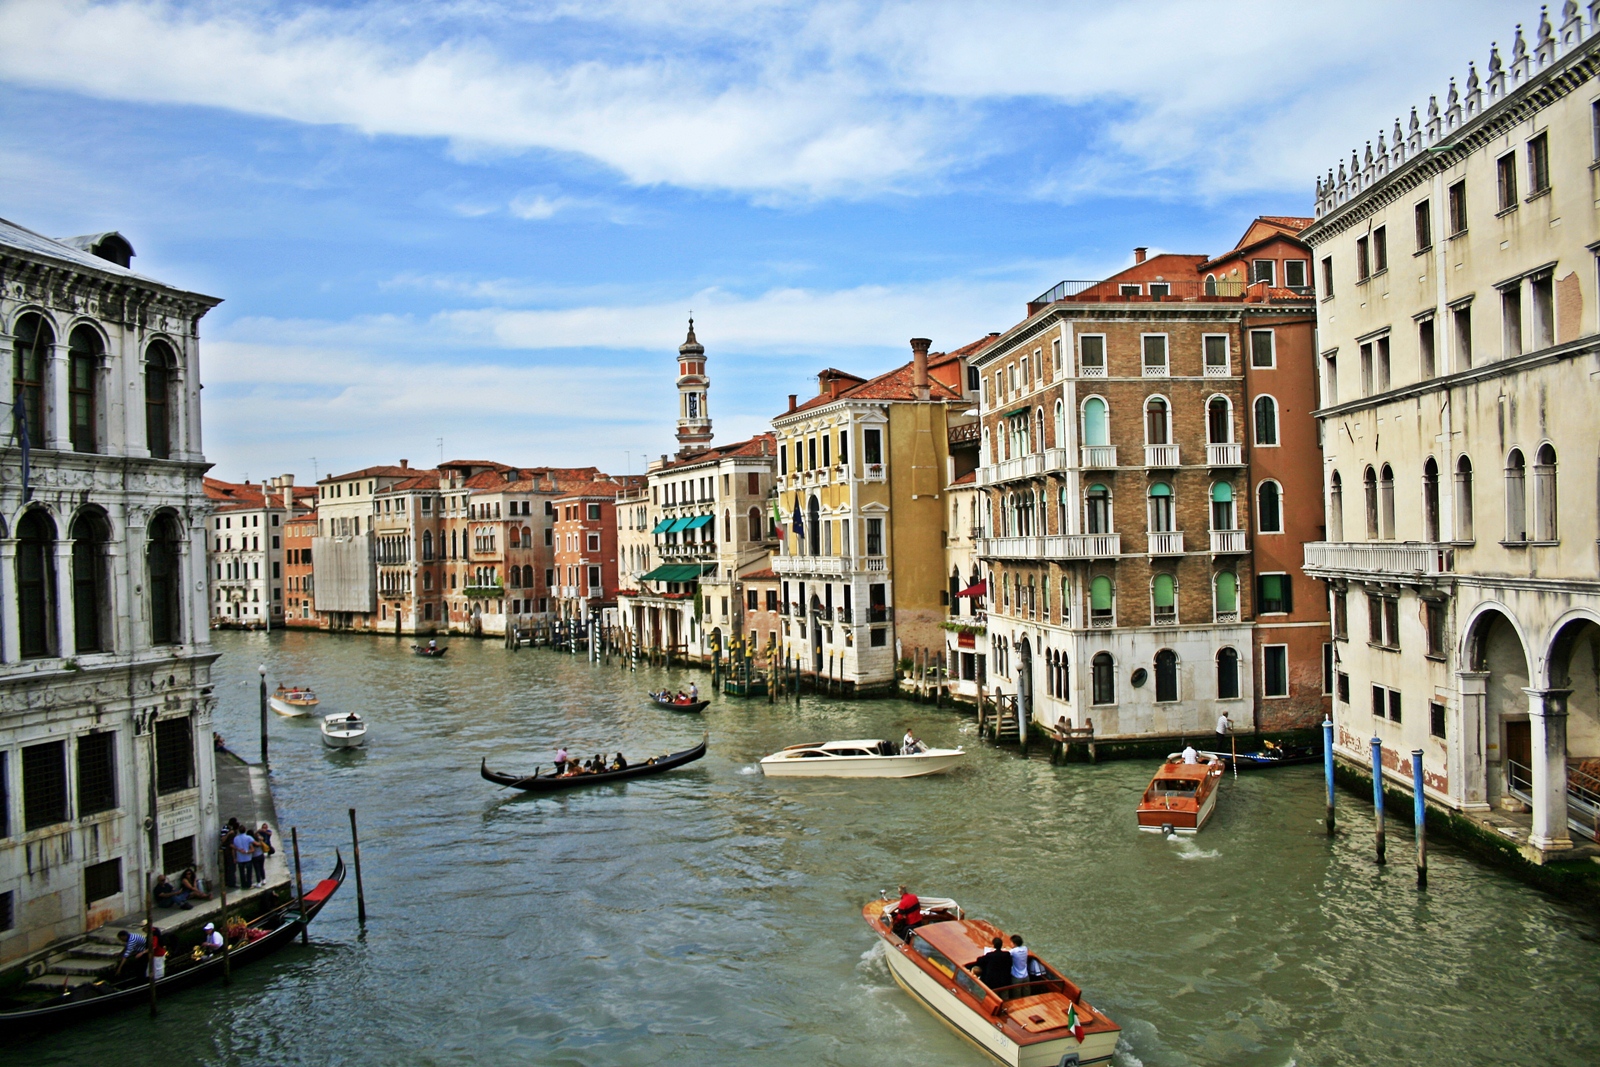 Venice Italy - Canals & Buildings